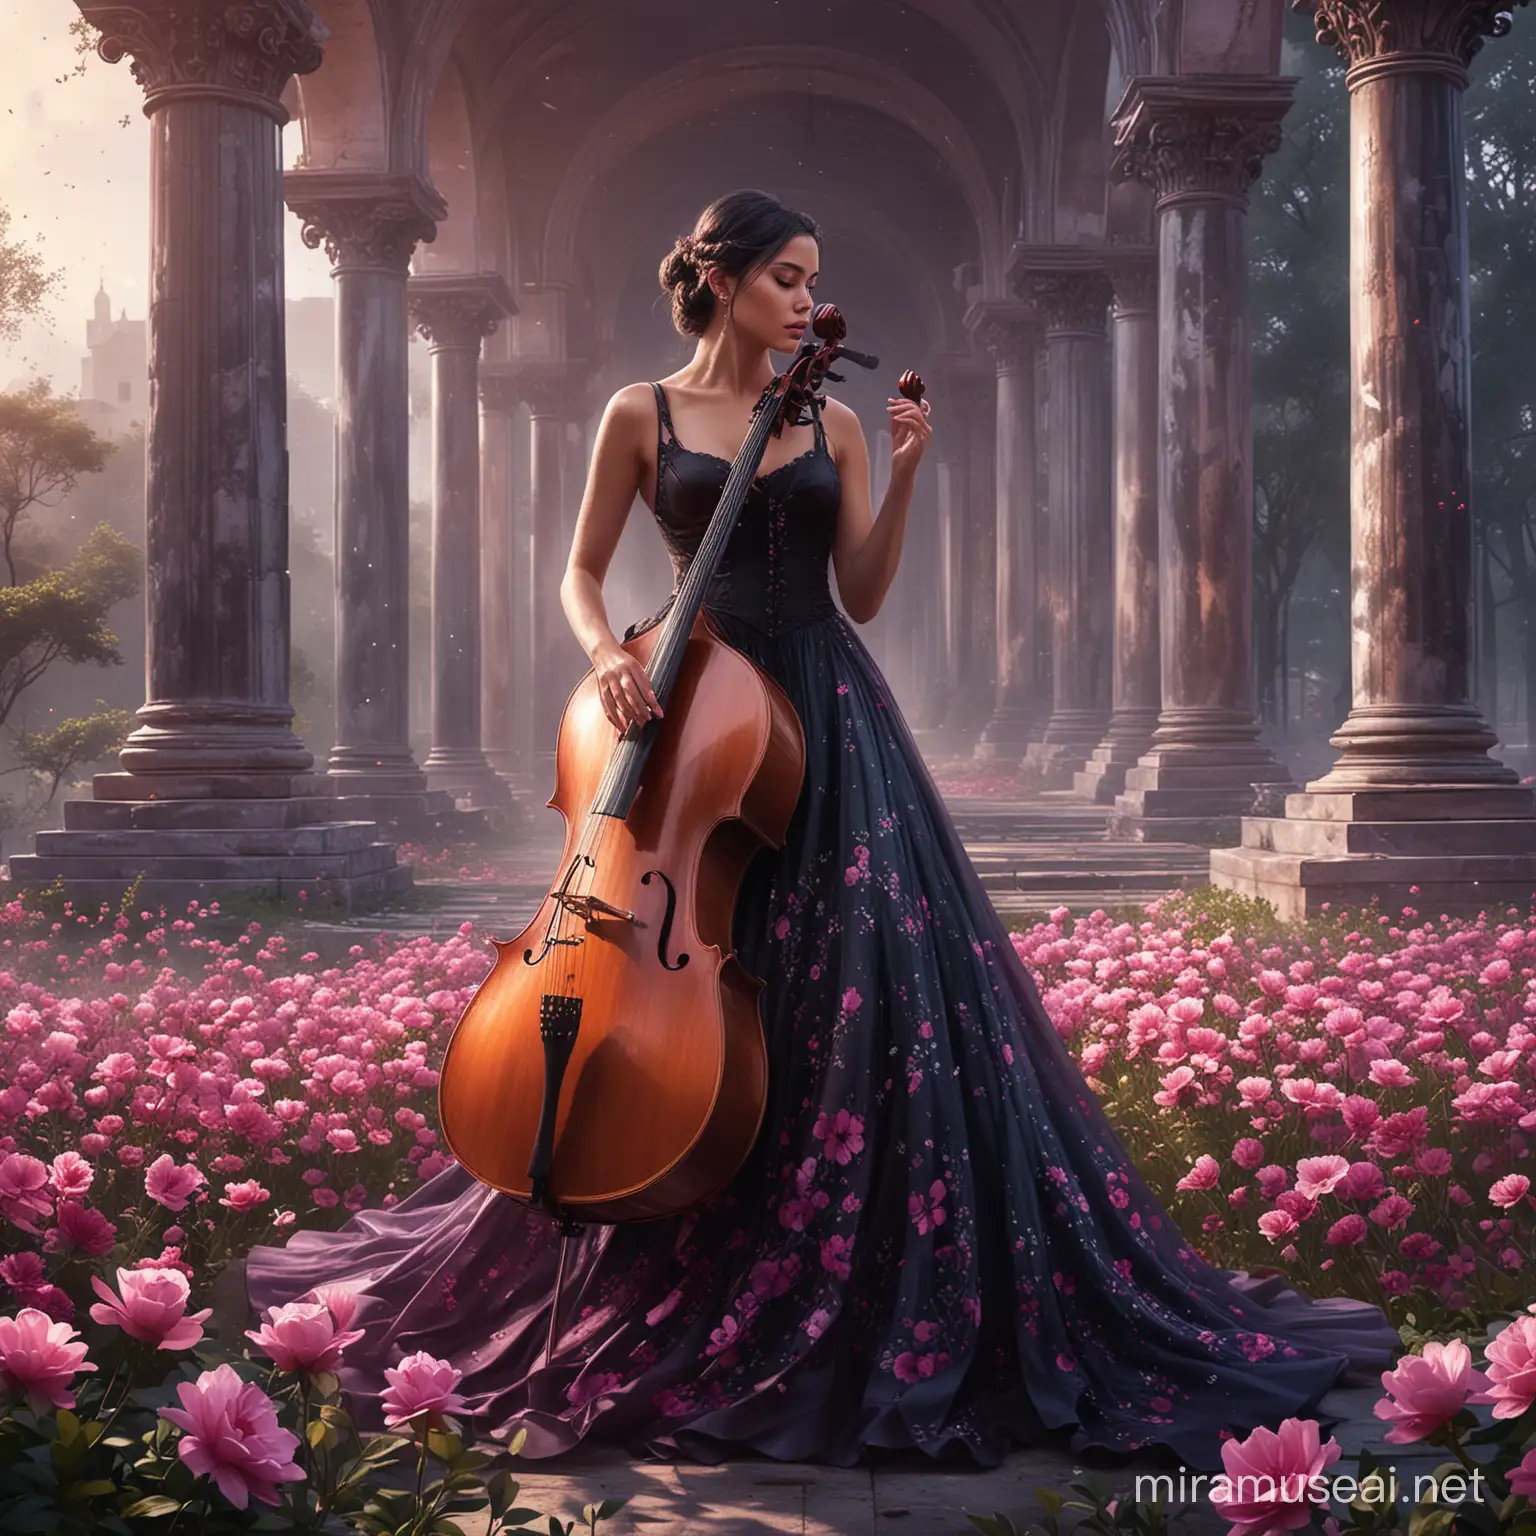 A beautiful woman, standing up on transparent ground, playing cello, surrounded by dark purple and dark pink flowers. Long black braid. Long elegant green dress, haute couture. Background sparkle and dark pink Petra monument. Digital art, illustration, digital illustration, digital painting